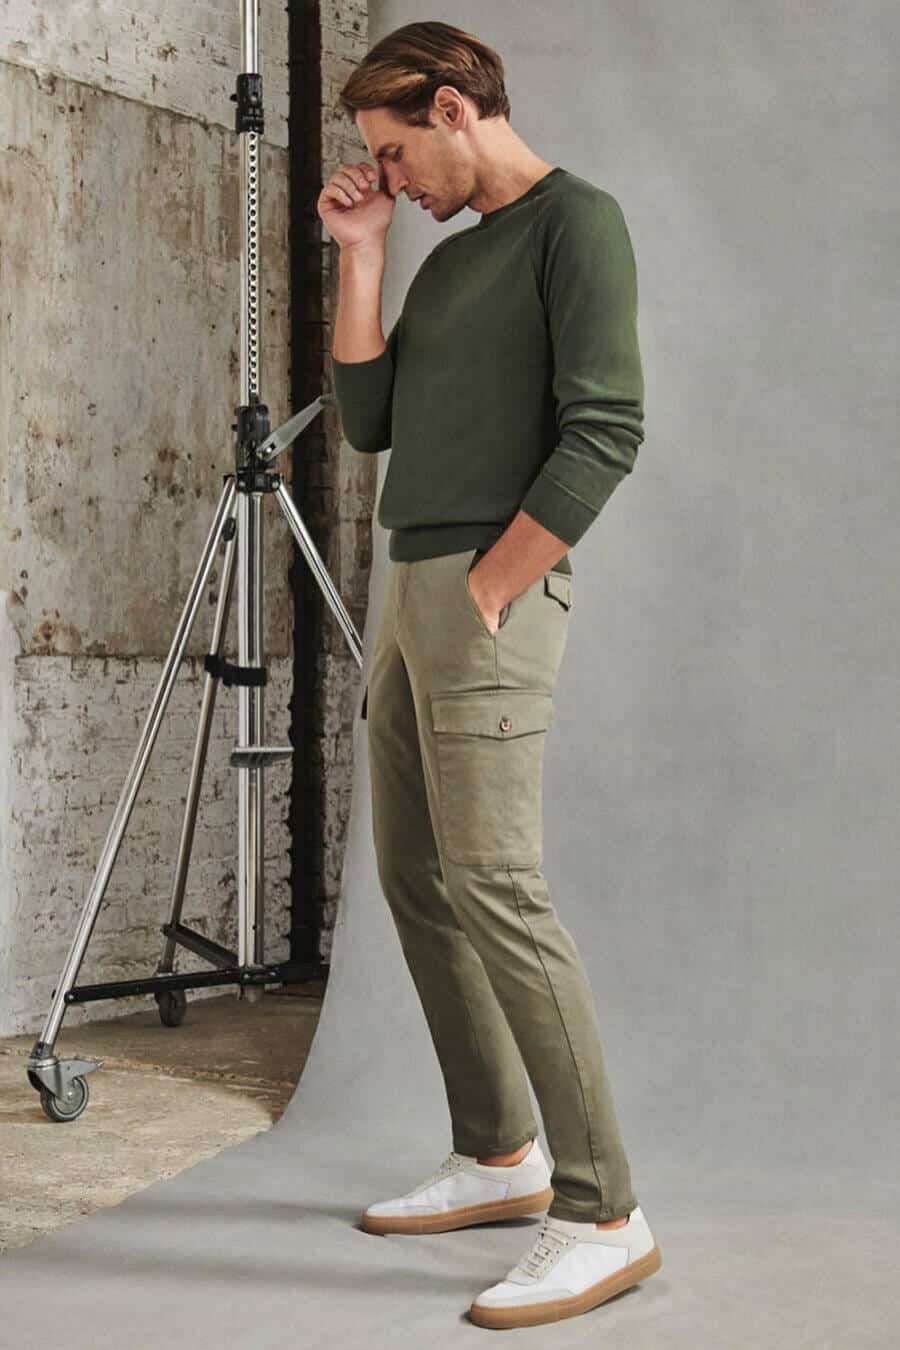 Men's slim green cargo pants with green sweatshirt and white sneakers outfit